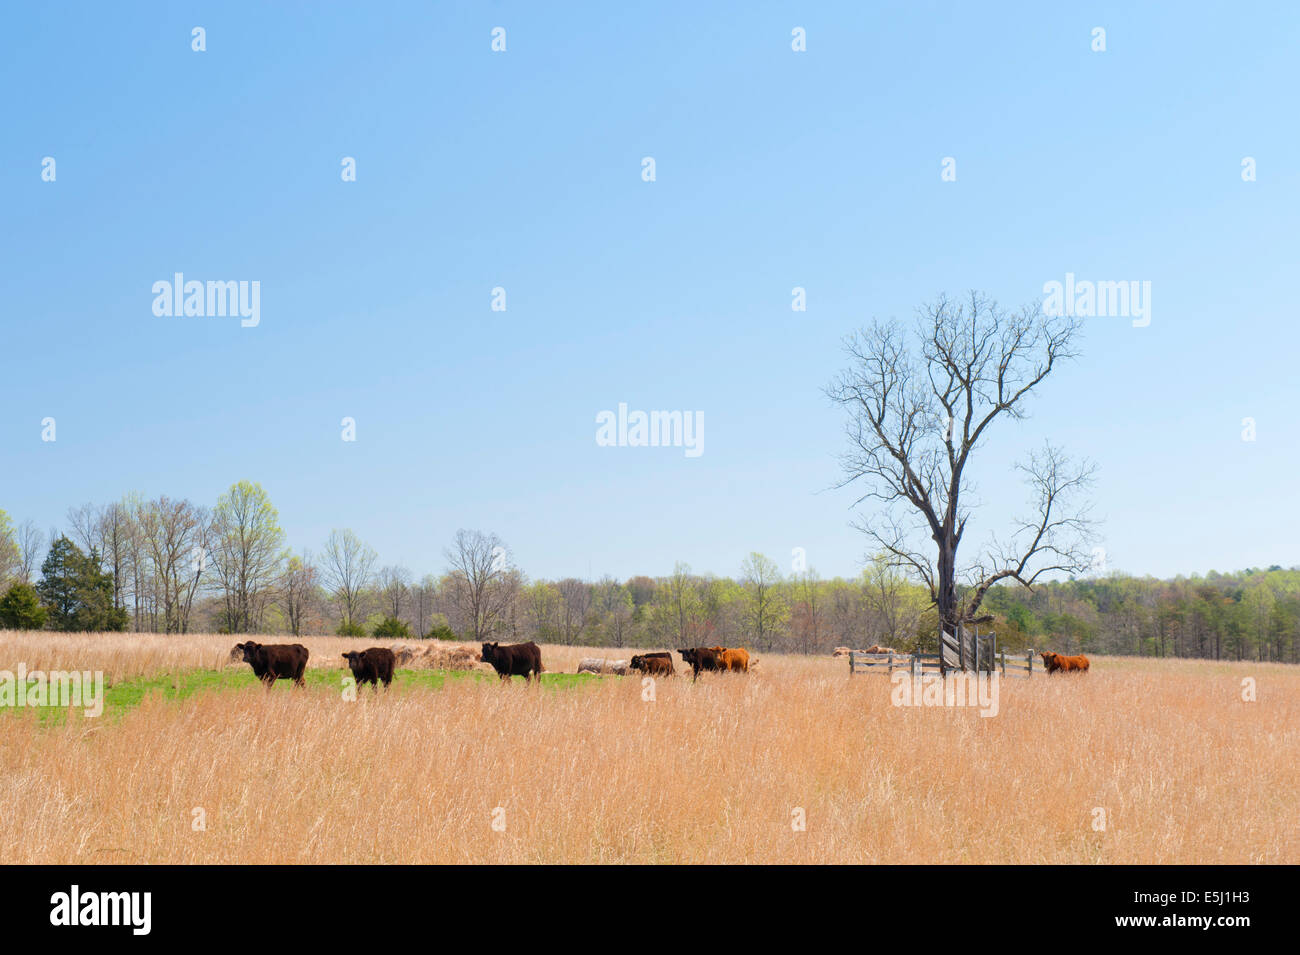 Herd of brown and red cattle walking in line across a pasture. Shenandoah Valley, Virginia, USA. Stock Photo